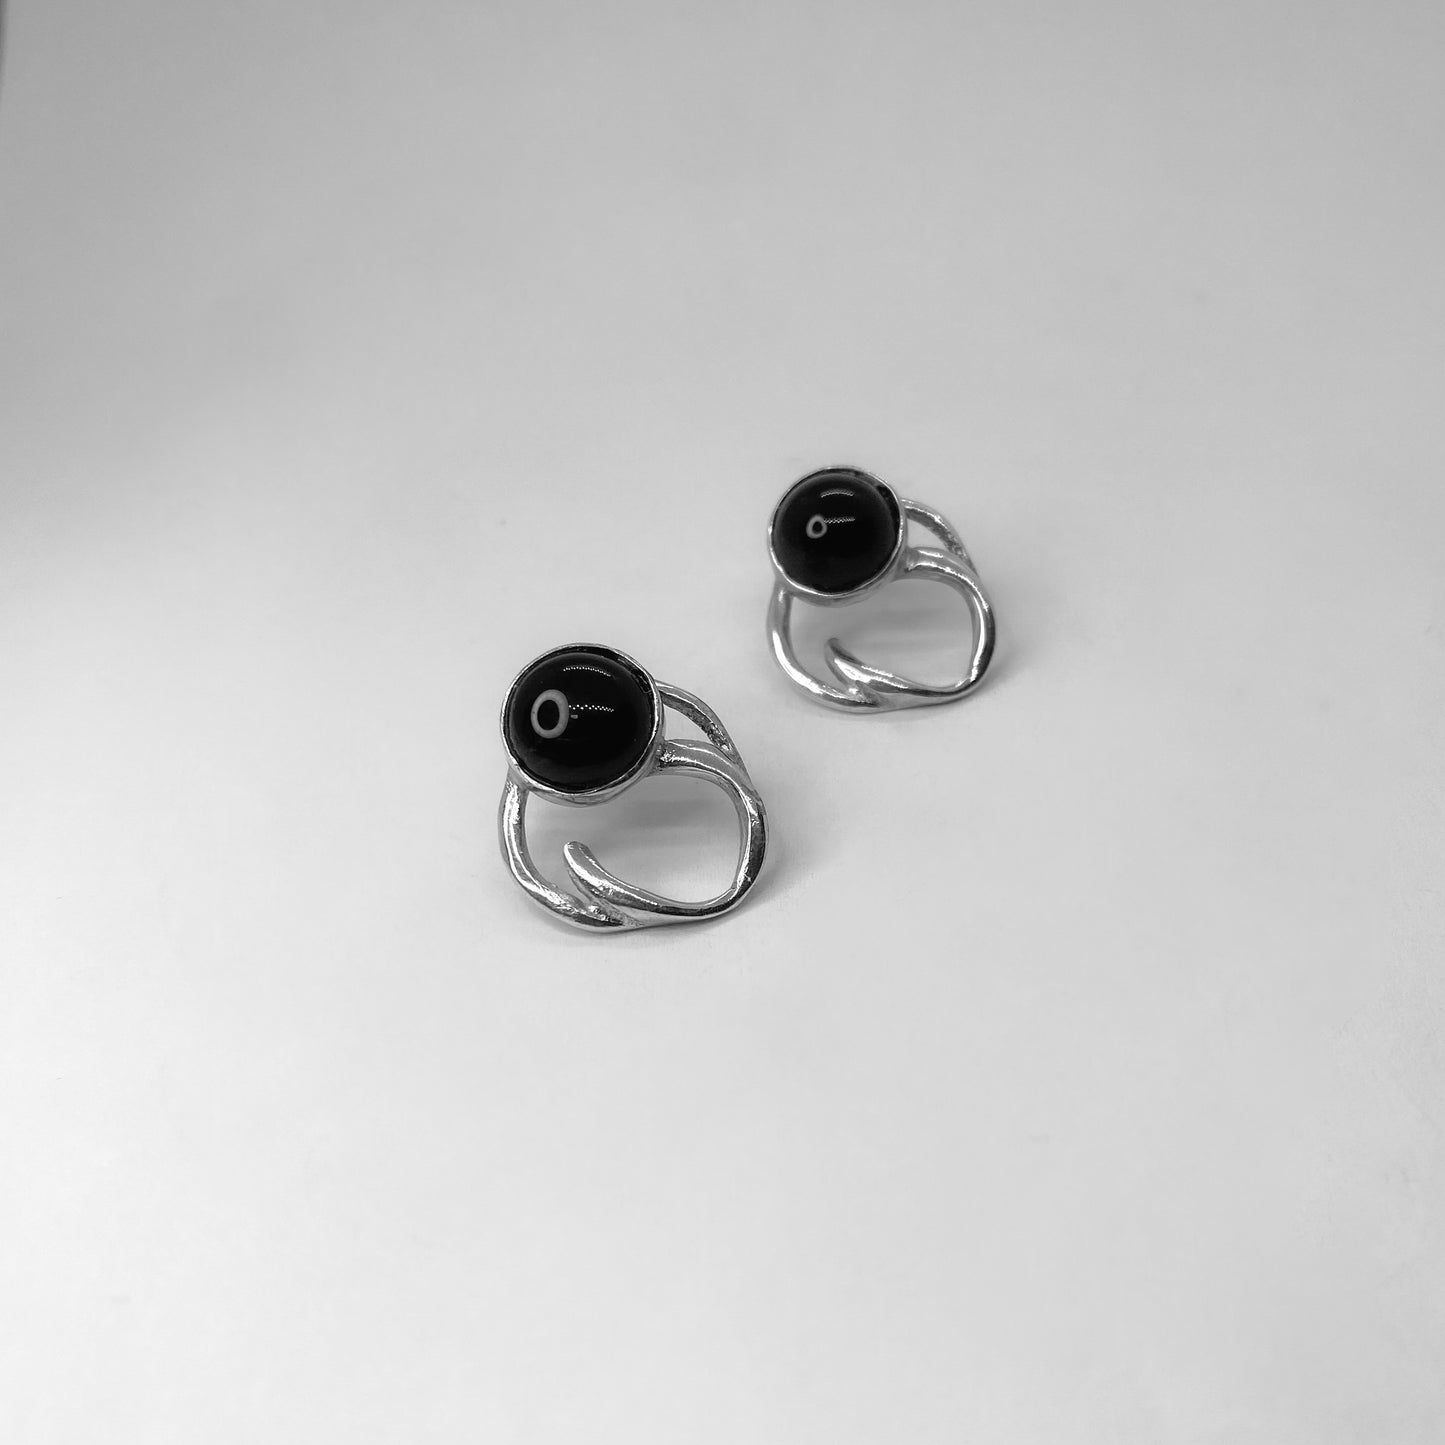 Handmade earrings crafted from sterling silver 925 with a semi-precious stone.